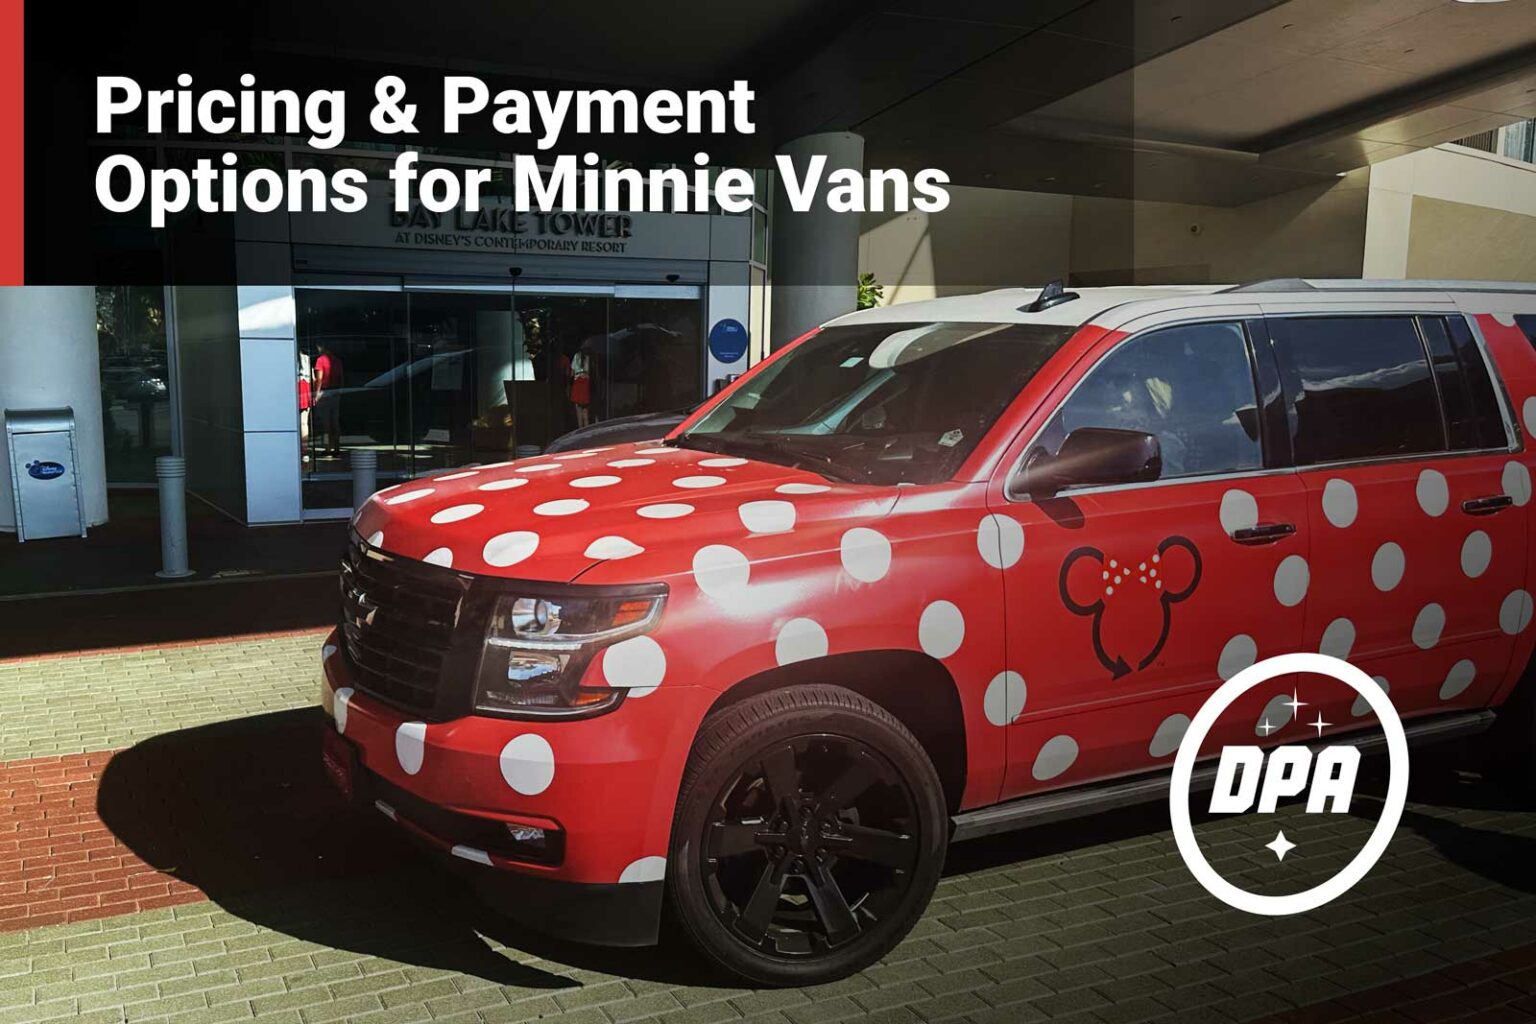 Pricing & Payment Options for Minnie Van Service